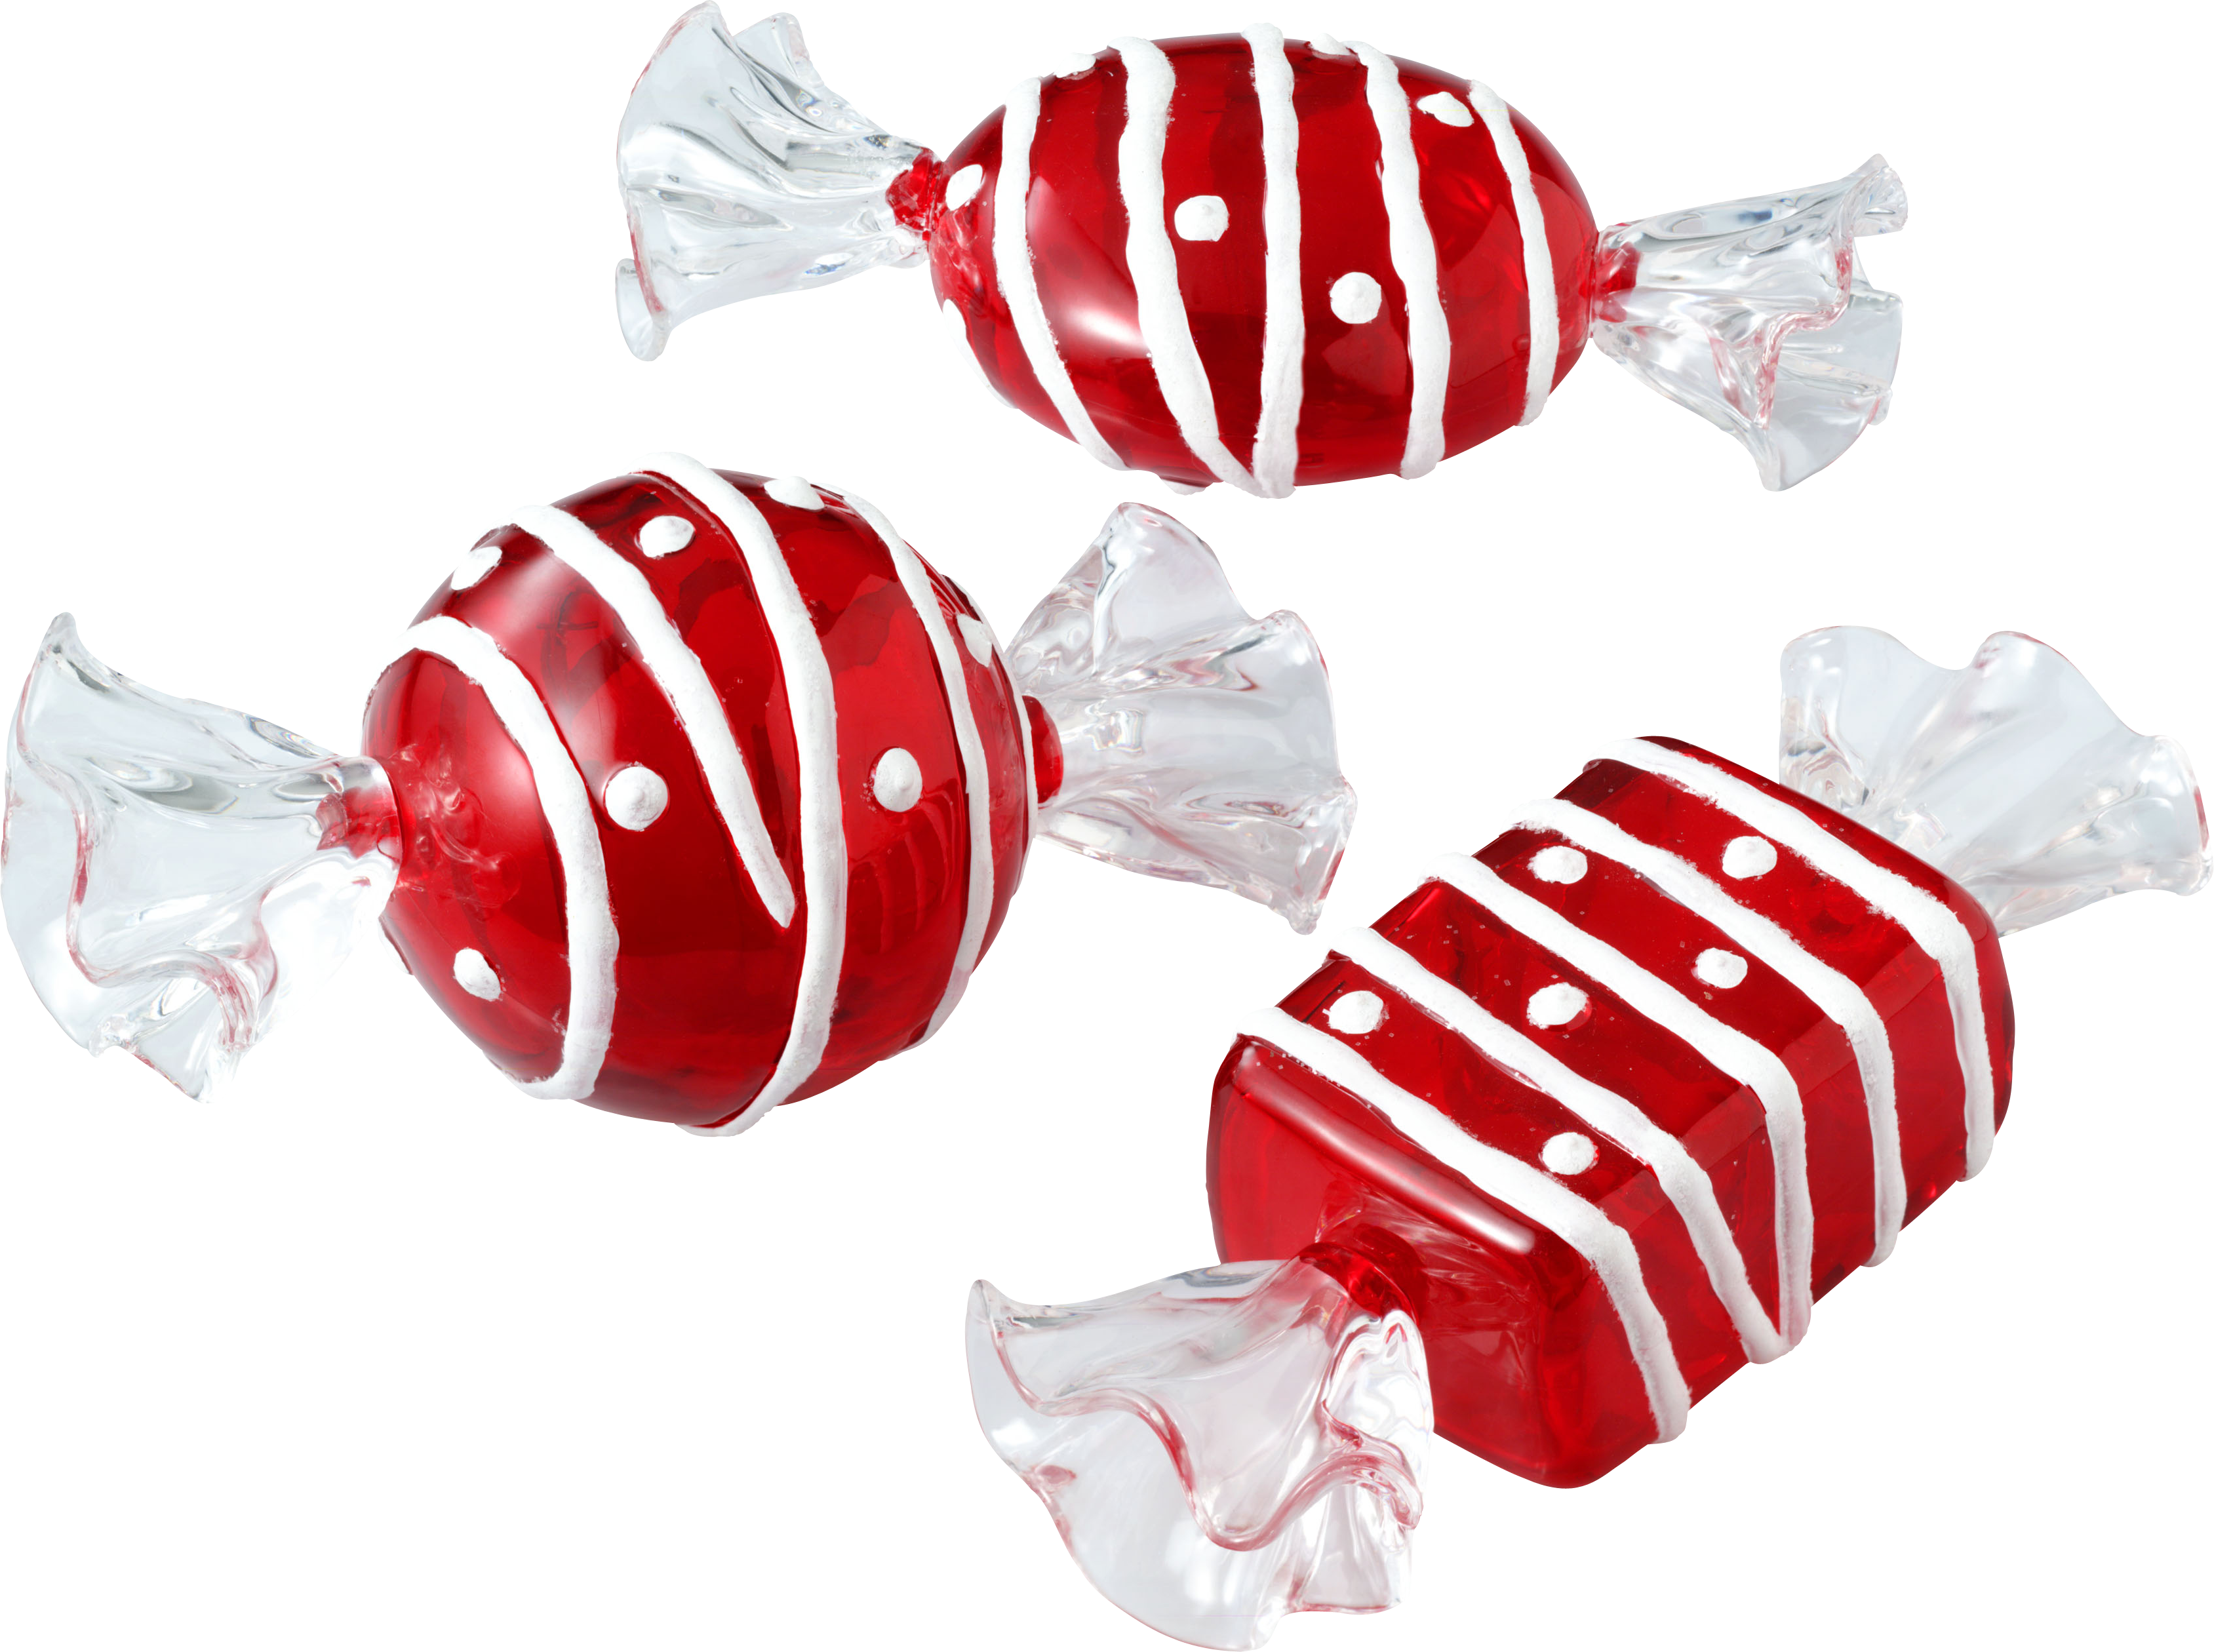 Red glass Bonbons PNG Image